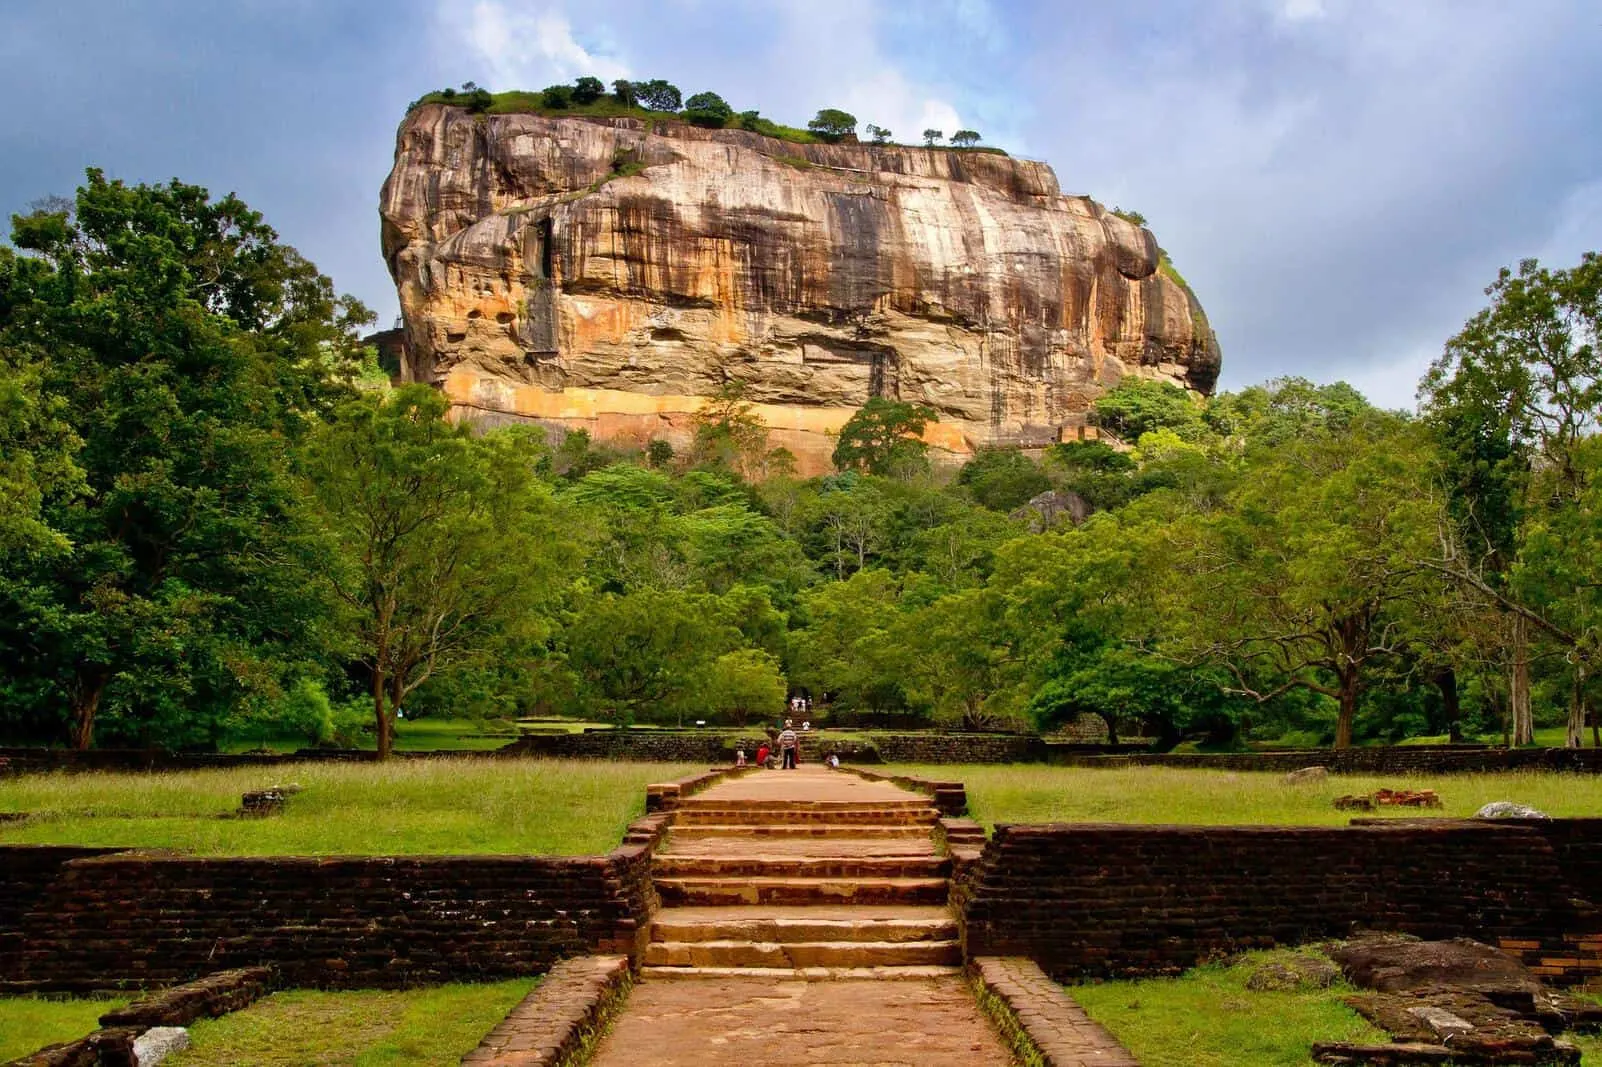 Spend at least 3 weeks in Sri Lanka to enjoy its nature & beauty.